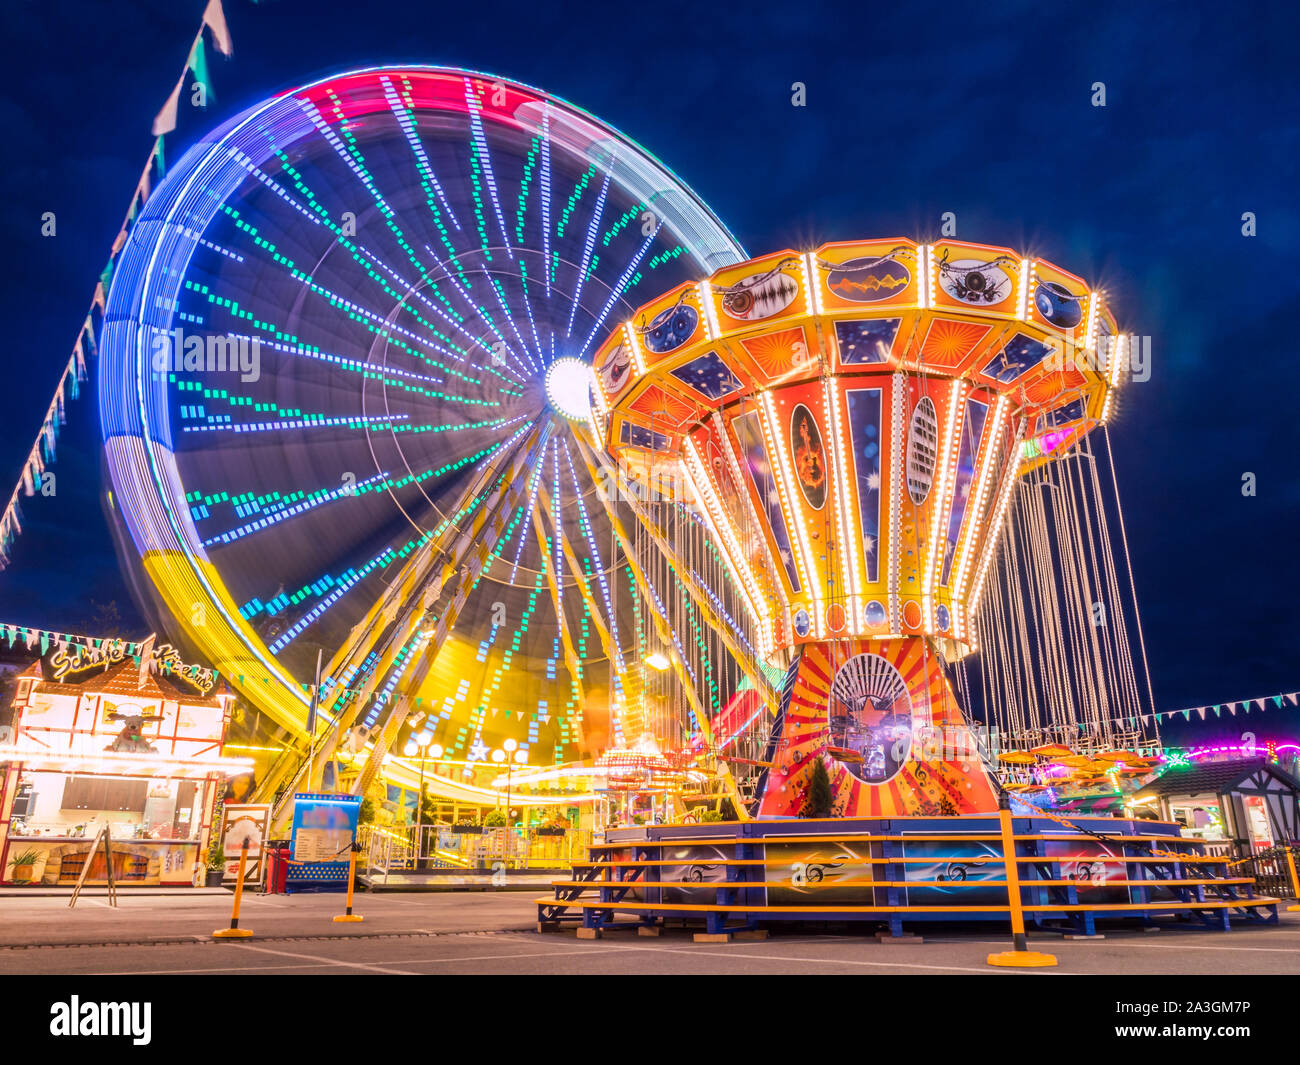 Ferris wheel and chain carousel in the evening at the fair Stock Photo